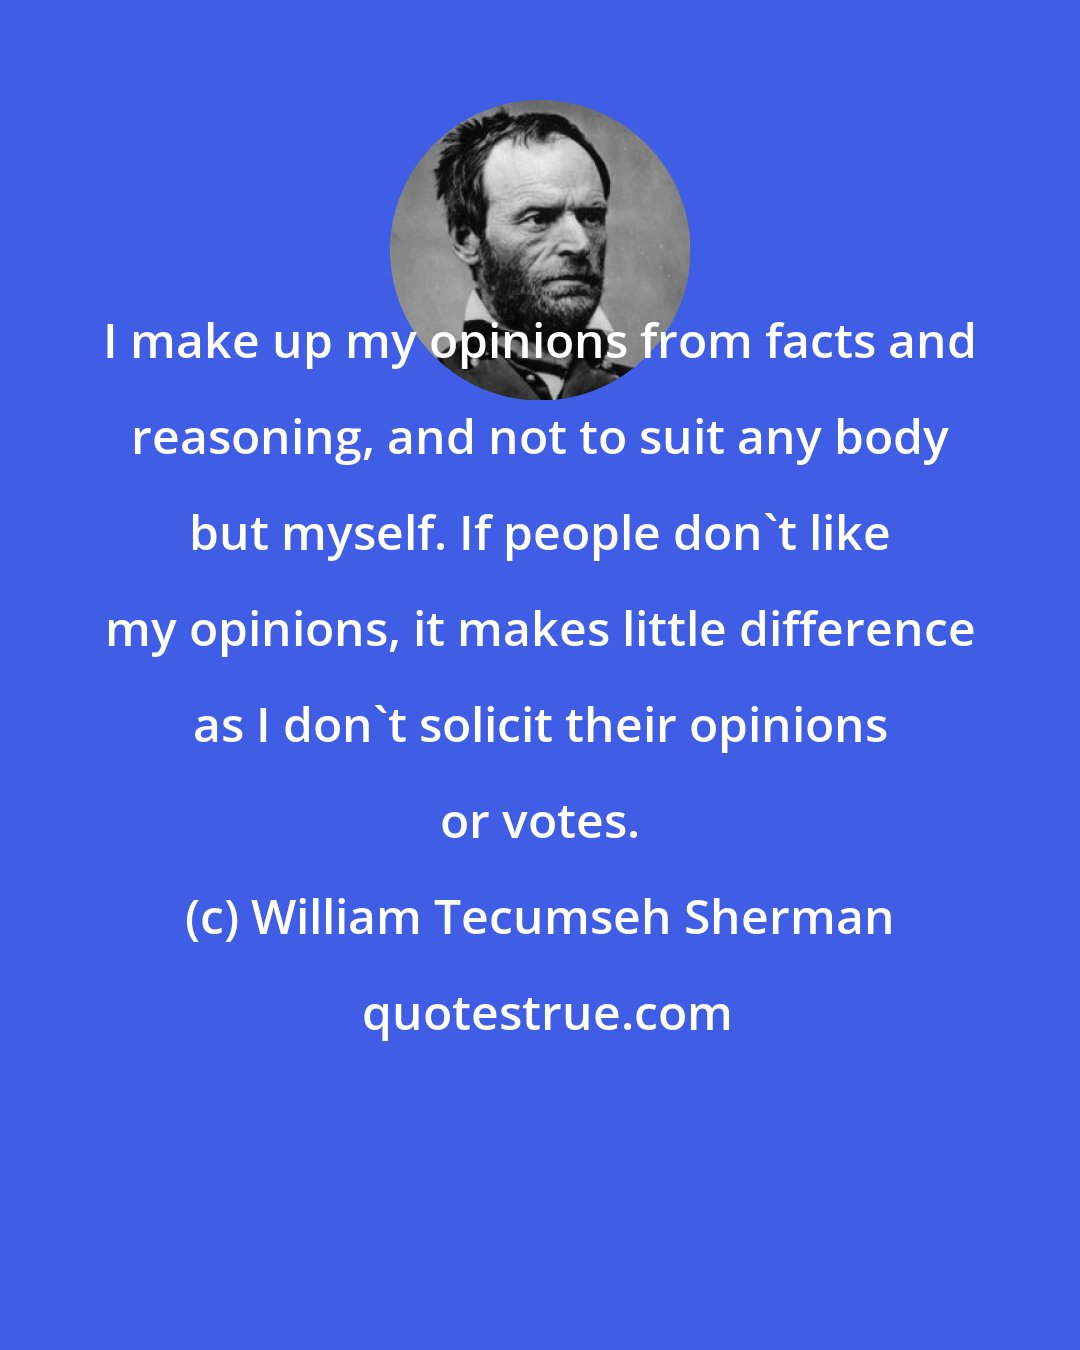 William Tecumseh Sherman: I make up my opinions from facts and reasoning, and not to suit any body but myself. If people don't like my opinions, it makes little difference as I don't solicit their opinions or votes.